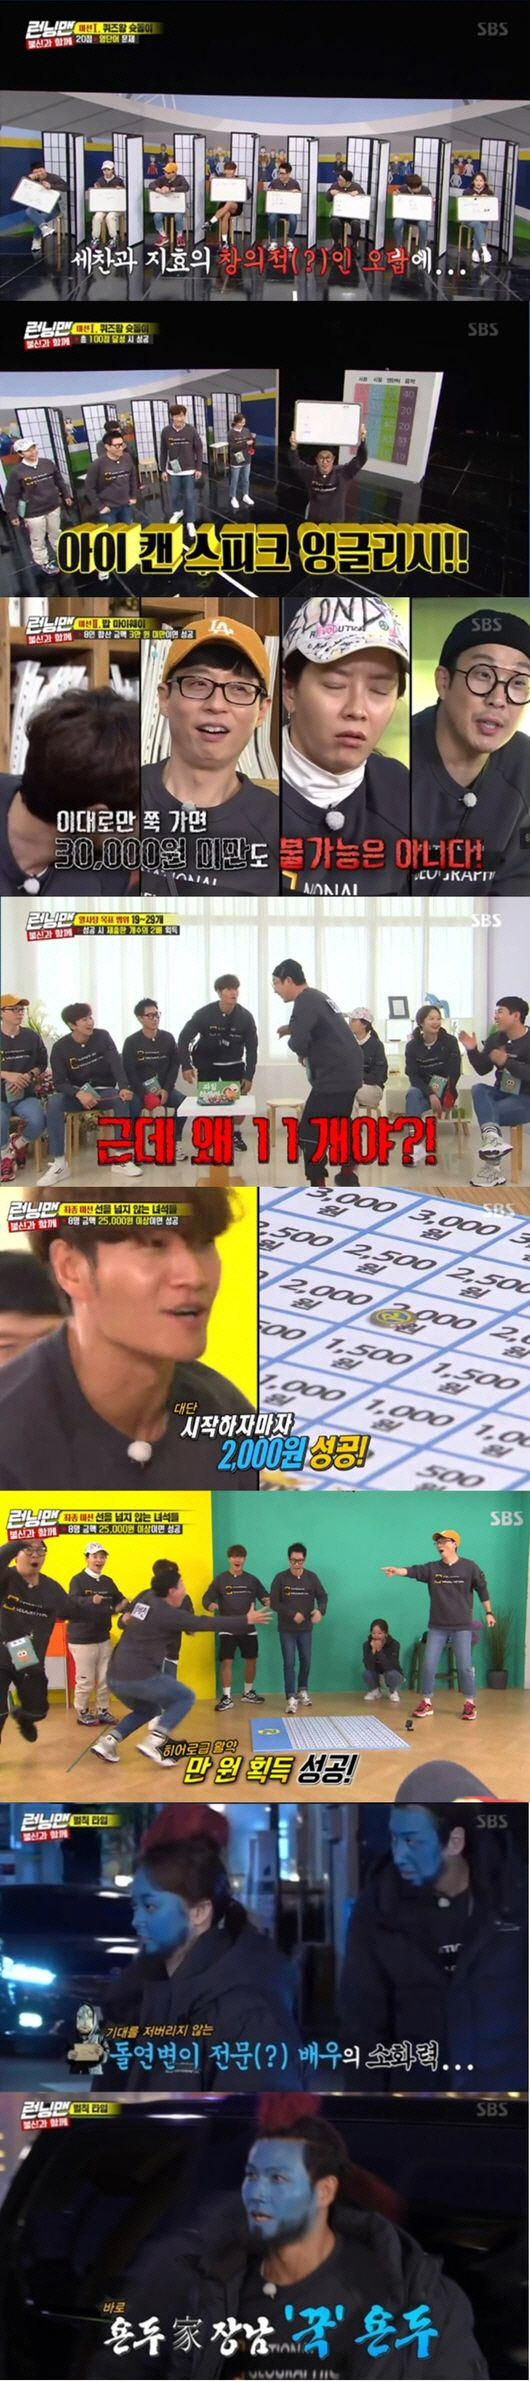 Running Man Jeon So-min, Lee Kwang-soo, and Kim Jong-kook laughed at the way they handed out Bungeo-pang to the citizens with Yondu makeup.In the SBS entertainment program Running Man broadcasted on the afternoon of the afternoon, four group missions were conducted and the Running Man race was held in the order of less penalties in case of failure.In the first mission, The King of Quiz he had to unanimously answer the correct answer: all kinds of fouls and Jeon So-mins wrong answers came out, but all the correct answers came out.In the second mission Bob My Way, the performance of Jeon So-min was prominent.One of the eight different menus with different prices was private, and if the sum was less than 30,000 won, it was a power pass.With Ji Suk-jin opting for a high-priced soy sauce, Jeon So-min chose a boiled egg and all the members ate well.On the other hand, the third mission Category Answer that succeeded when all the people said the category presented in 8 seconds failed, and once again the distrust of the members raised their heads and laughed.Fortunately, in the final mission The Guys who do not cross the line, Yang Se-chan won the 10,000 won in his performance and got a good feeling.After the final mission, Yang Se-chan won the penalty exemption by ranking first by member, and the penalty was confirmed as Jeon So-min and Lee Kwang-soo became 7th and 8th.Penalists Jeon So-min and Lee Kwang-soo had to sell Bungeo-pang on the street with Running Man-pyo Megahit makeup Yondu makeup, and pointed out Kim Jong-kook as additional penalties.The three humiliation sales scene, which came out on the street in Yondus makeup, rose to the highest audience rating of 8.4% per minute and accounted for the best one minute.